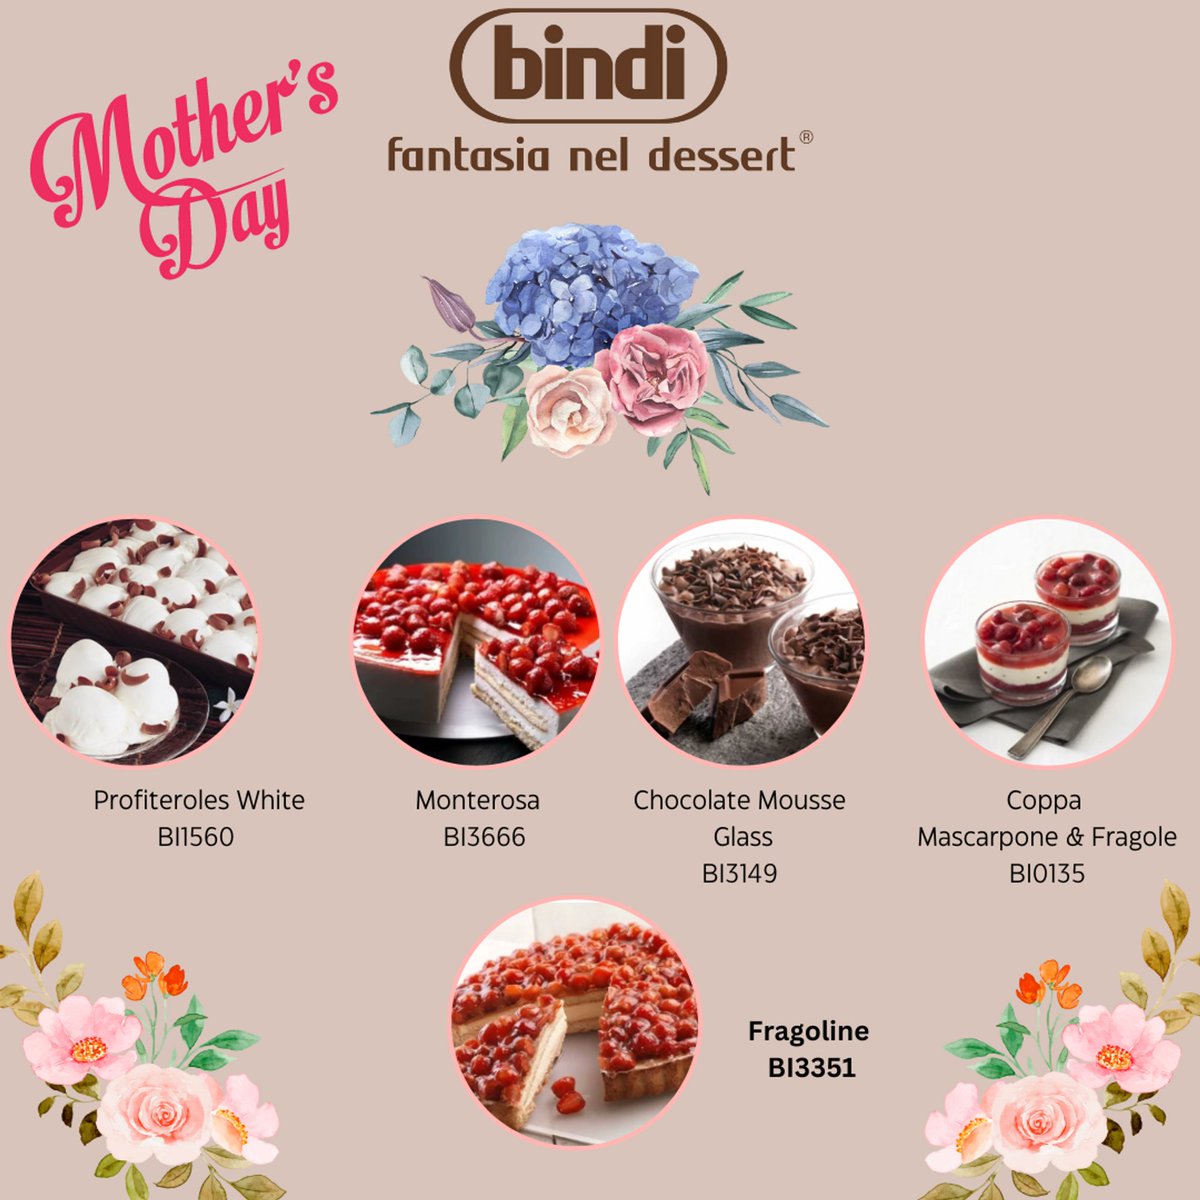 Need some inspiration for Mother's Day? Check out some of these star items from Bindi Desserts! Individual portions, pre-cut cakes and more, your new favorite is waiting to be served. #bostonfoodies #metrowestfoodies #southshorefoodies #bindidesserts #dessert #mothersday